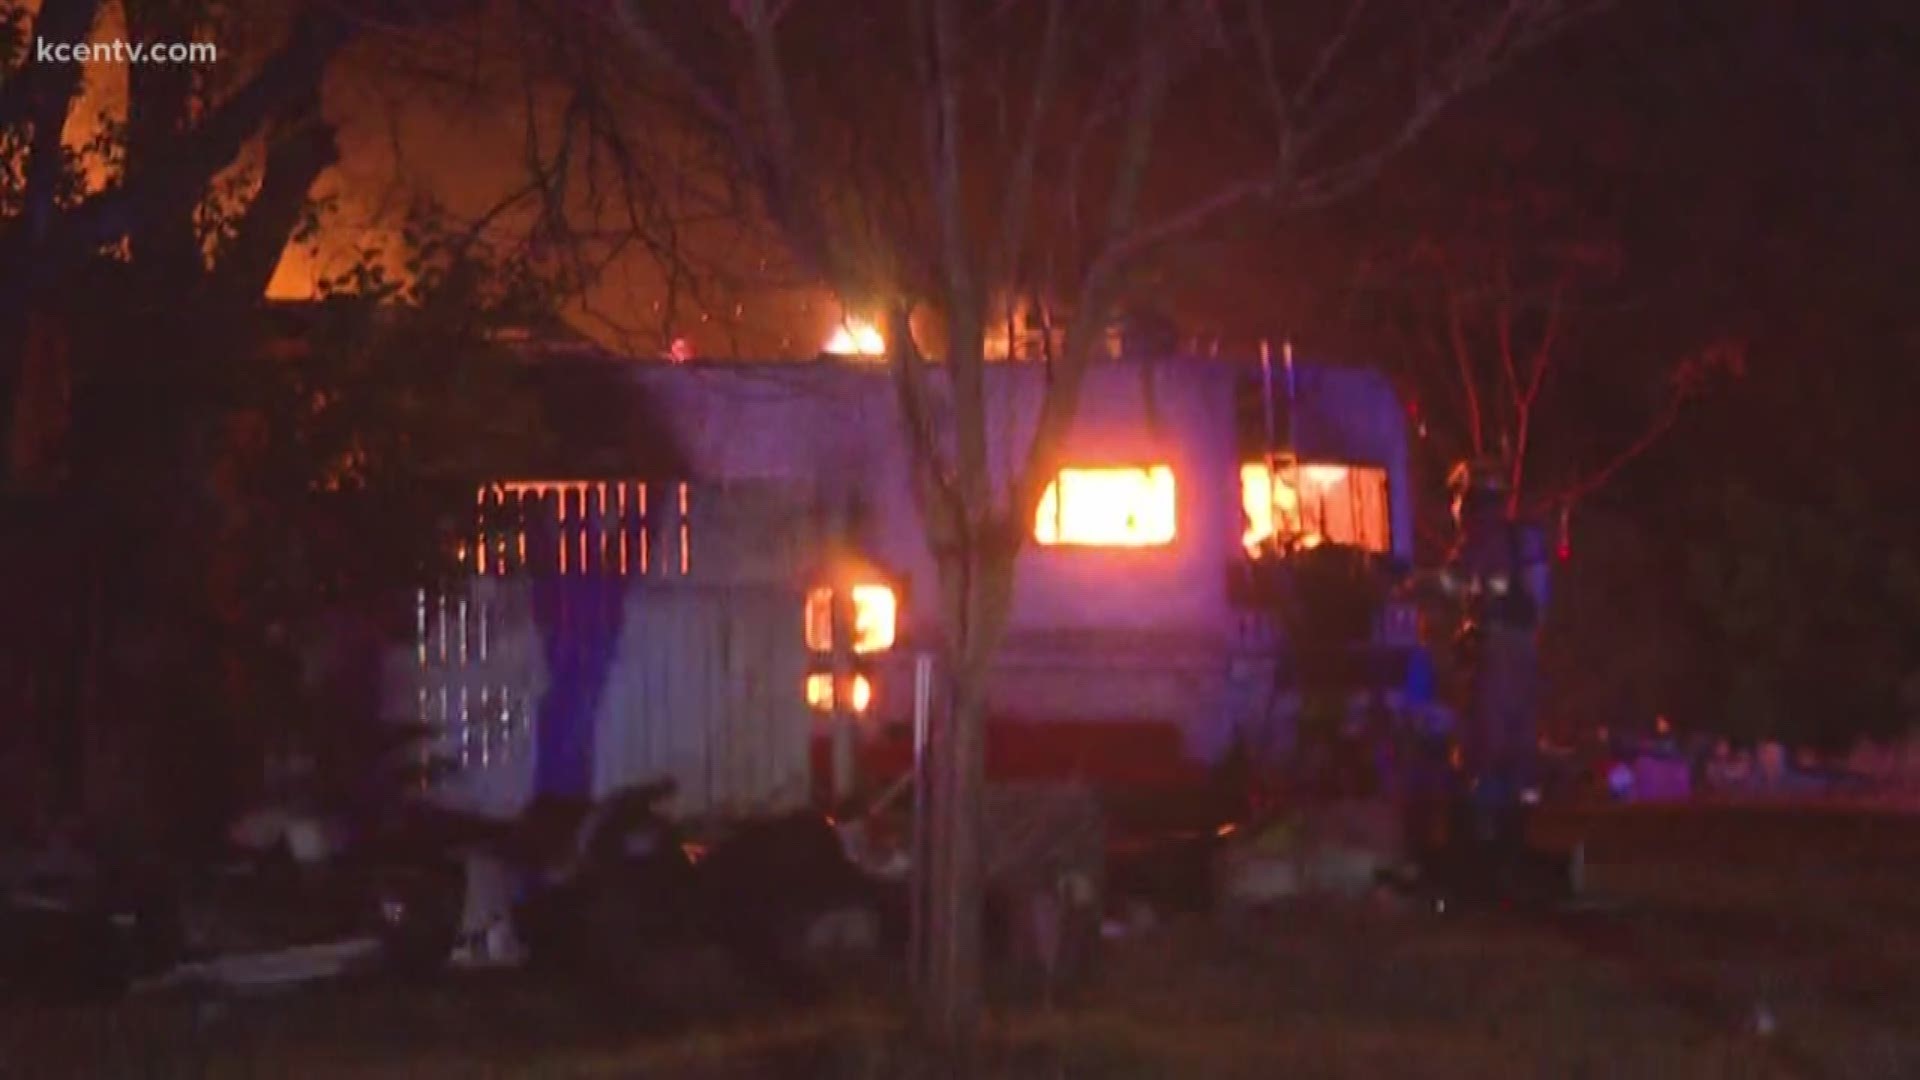 Jamie Kennedy reported live from the scene where a trailer home caught fire early Thursday morning in Belton.